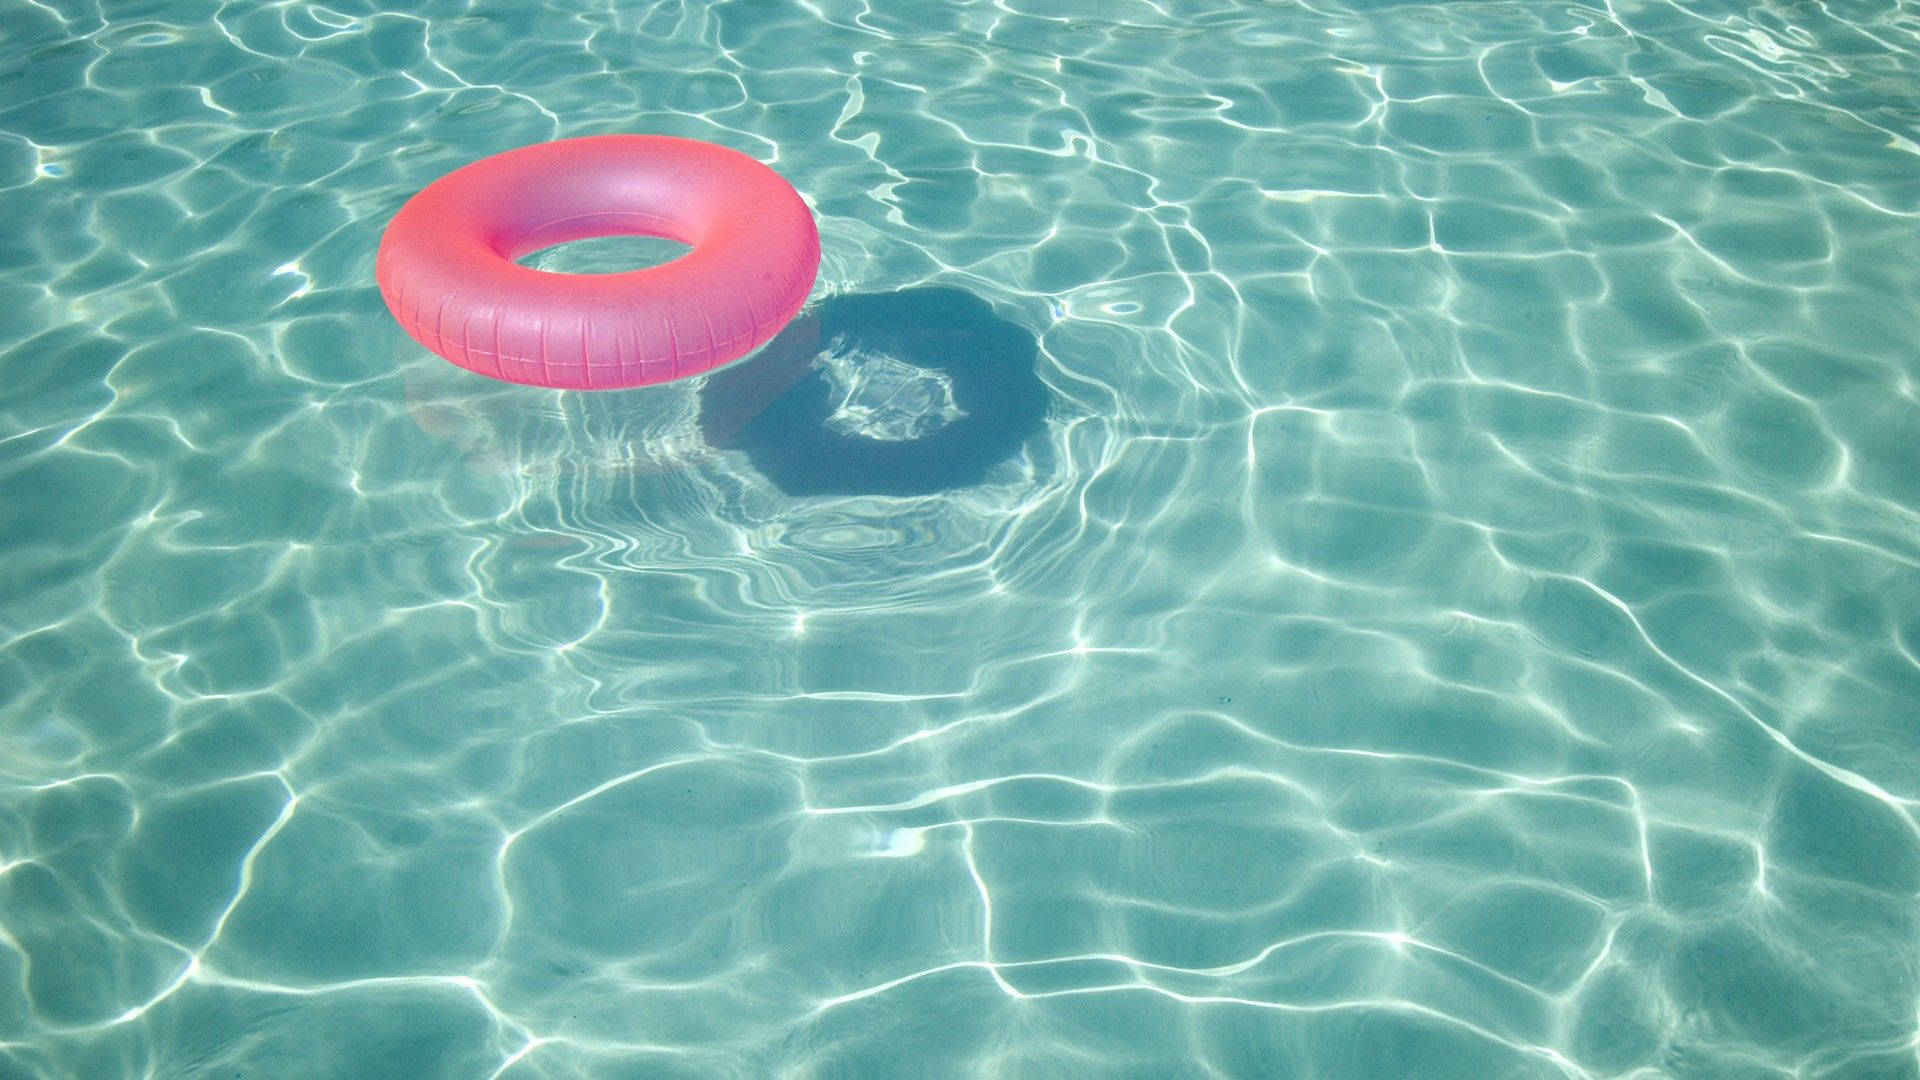 Refreshing pool with a pink float Wallpaper